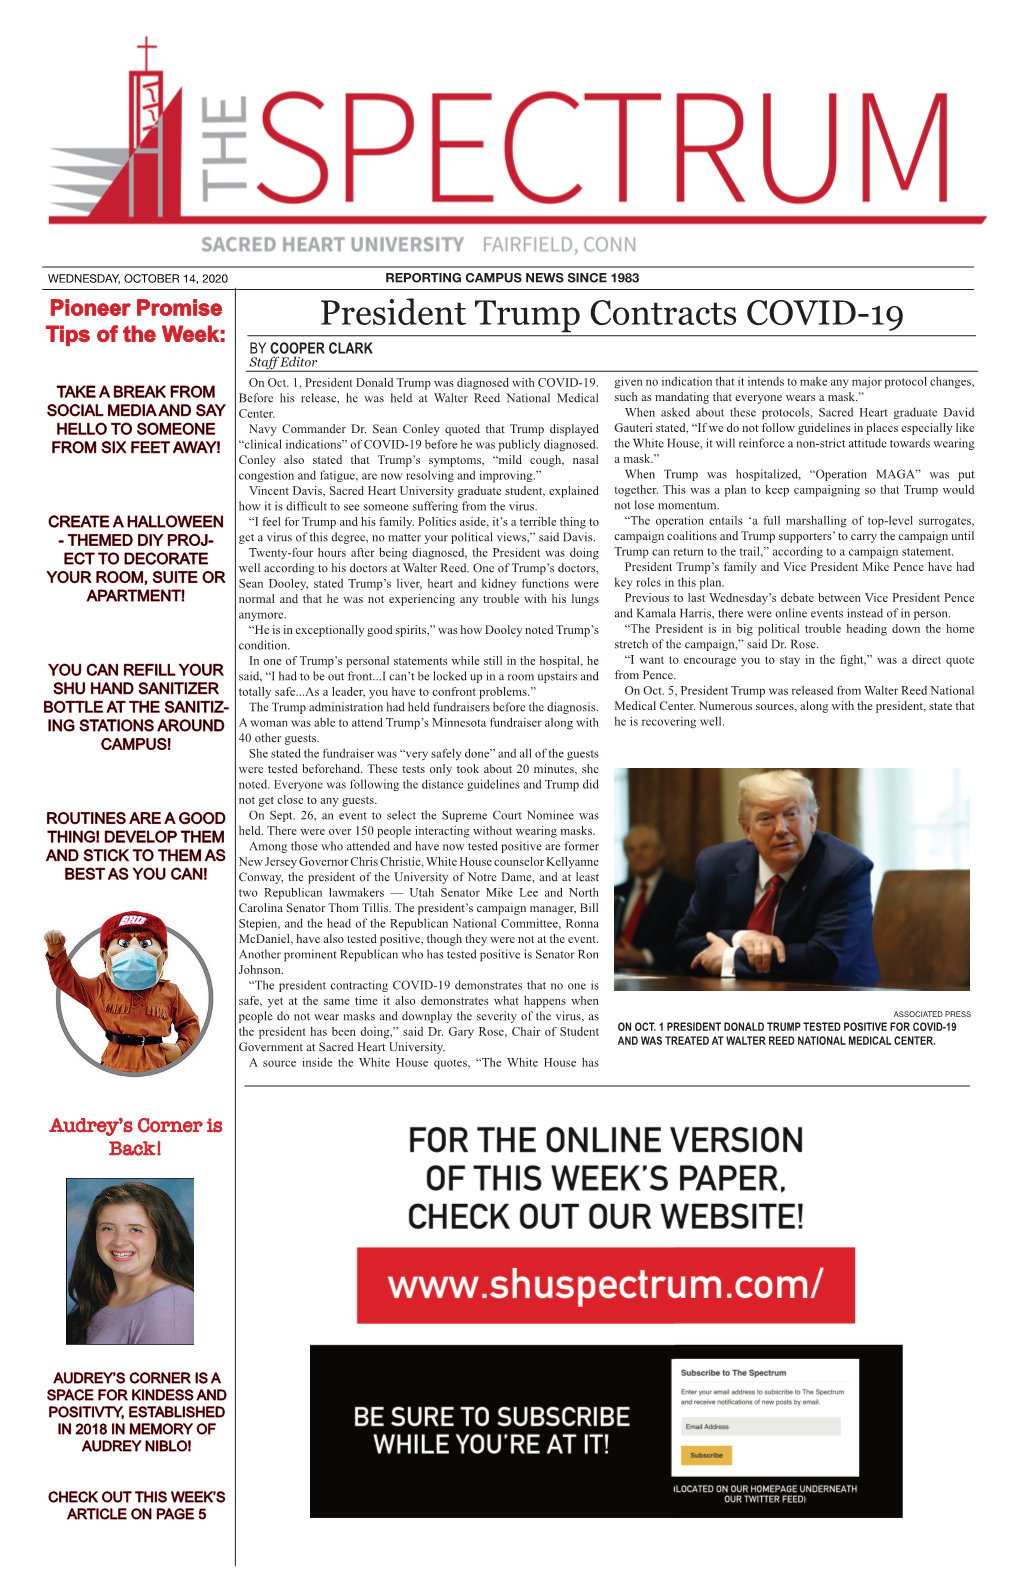 President Trump Contracts COVID-19 Tips of the Week: by COOPER CLARK Staﬀ Editor on Oct